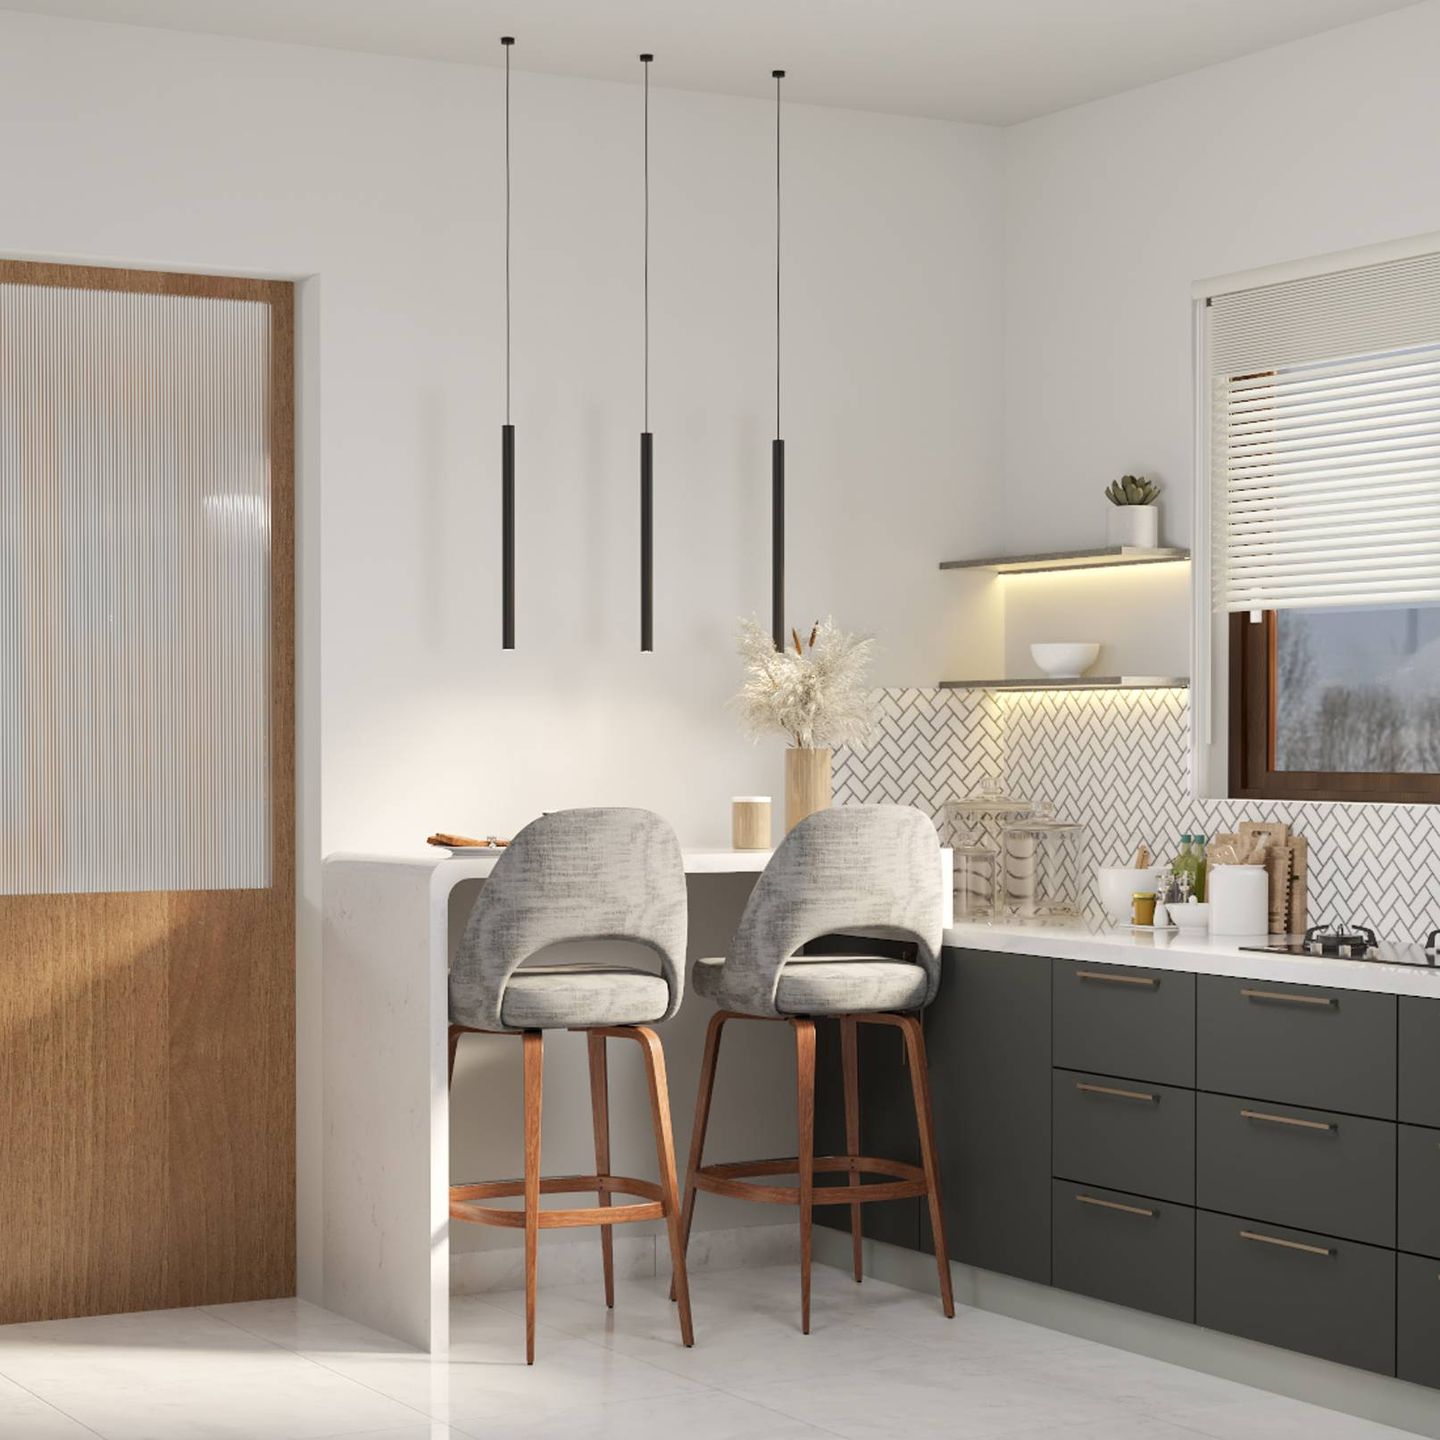 Modern Open Kitchen Design With A 2-Seater Breakfast Counter